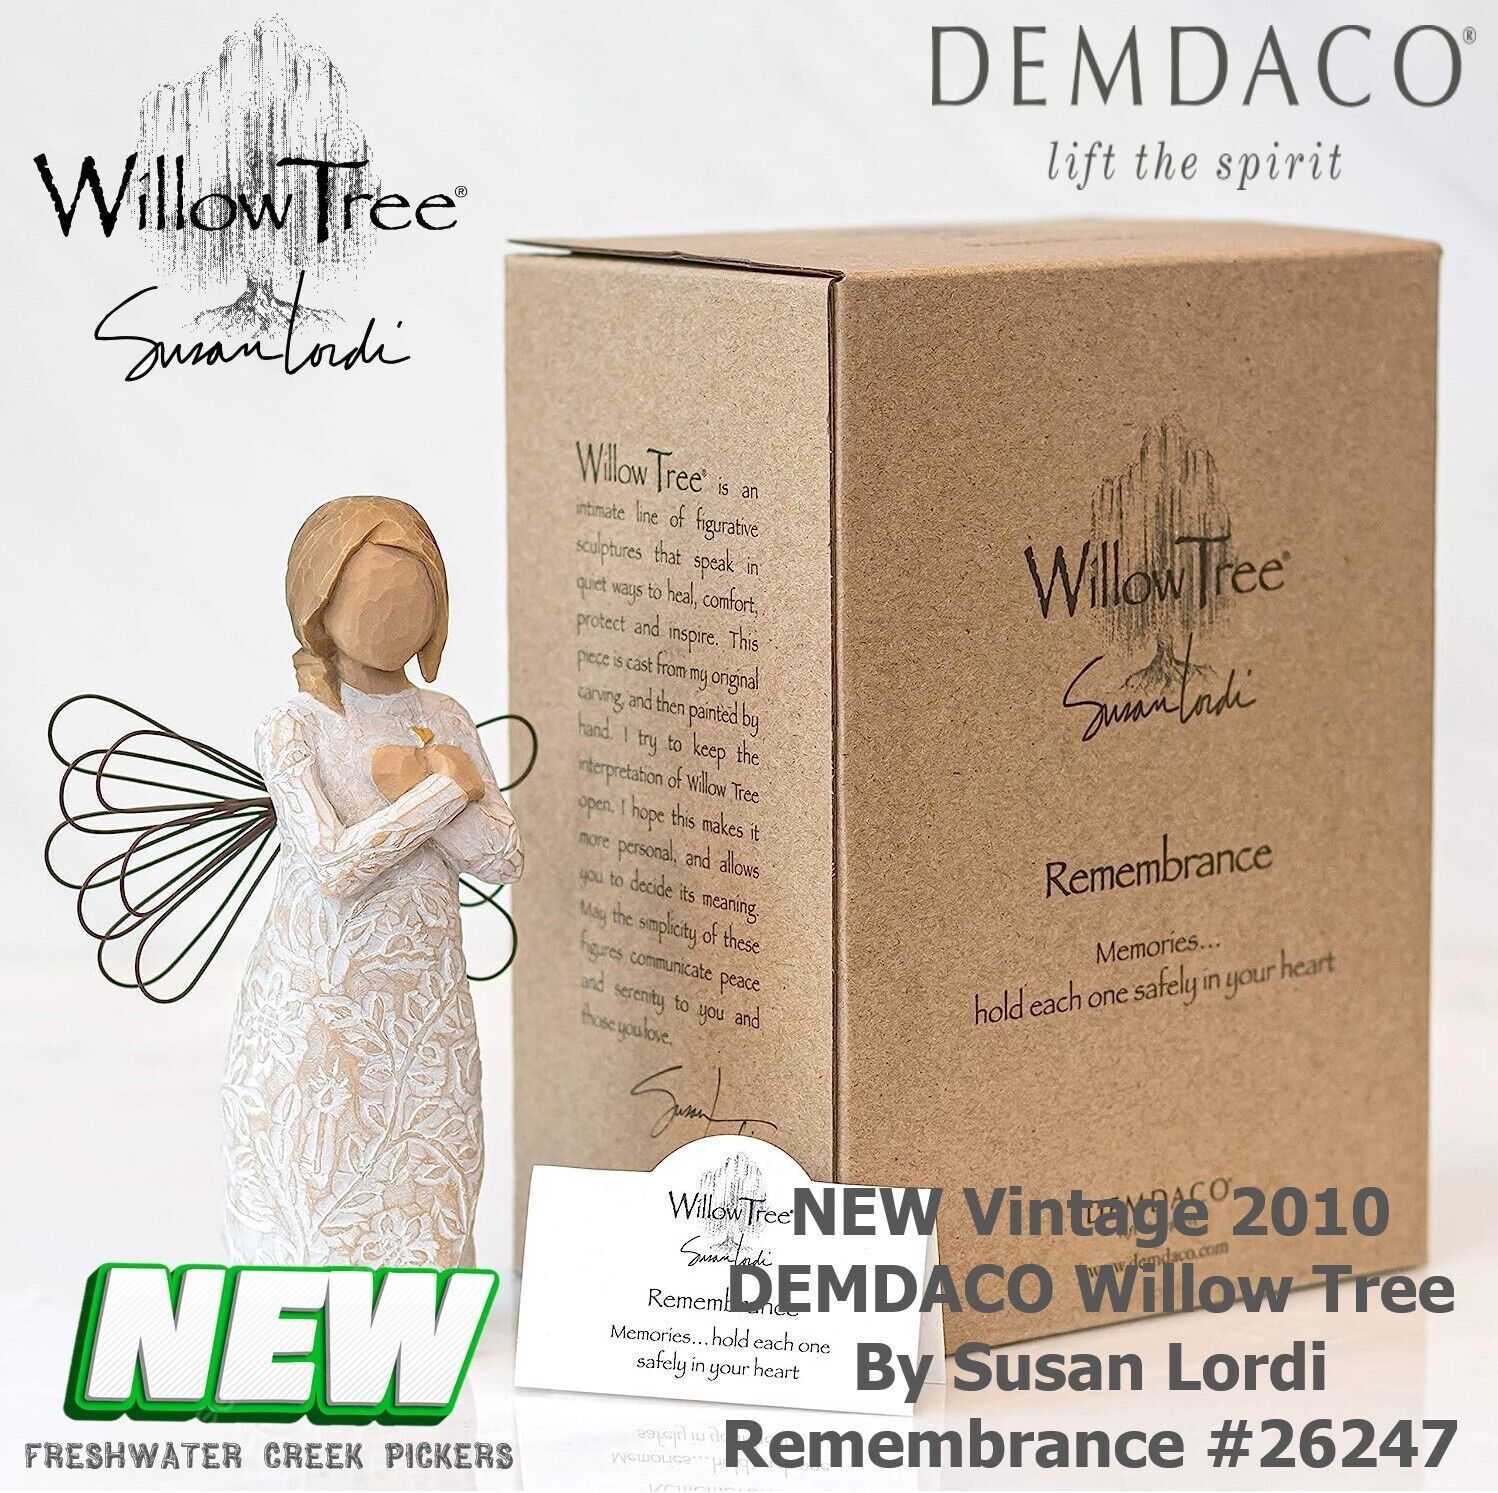 Rare NEW Vintage 2010 DEMDACO Willow Tree By Susan Lordi Remembrance #26247